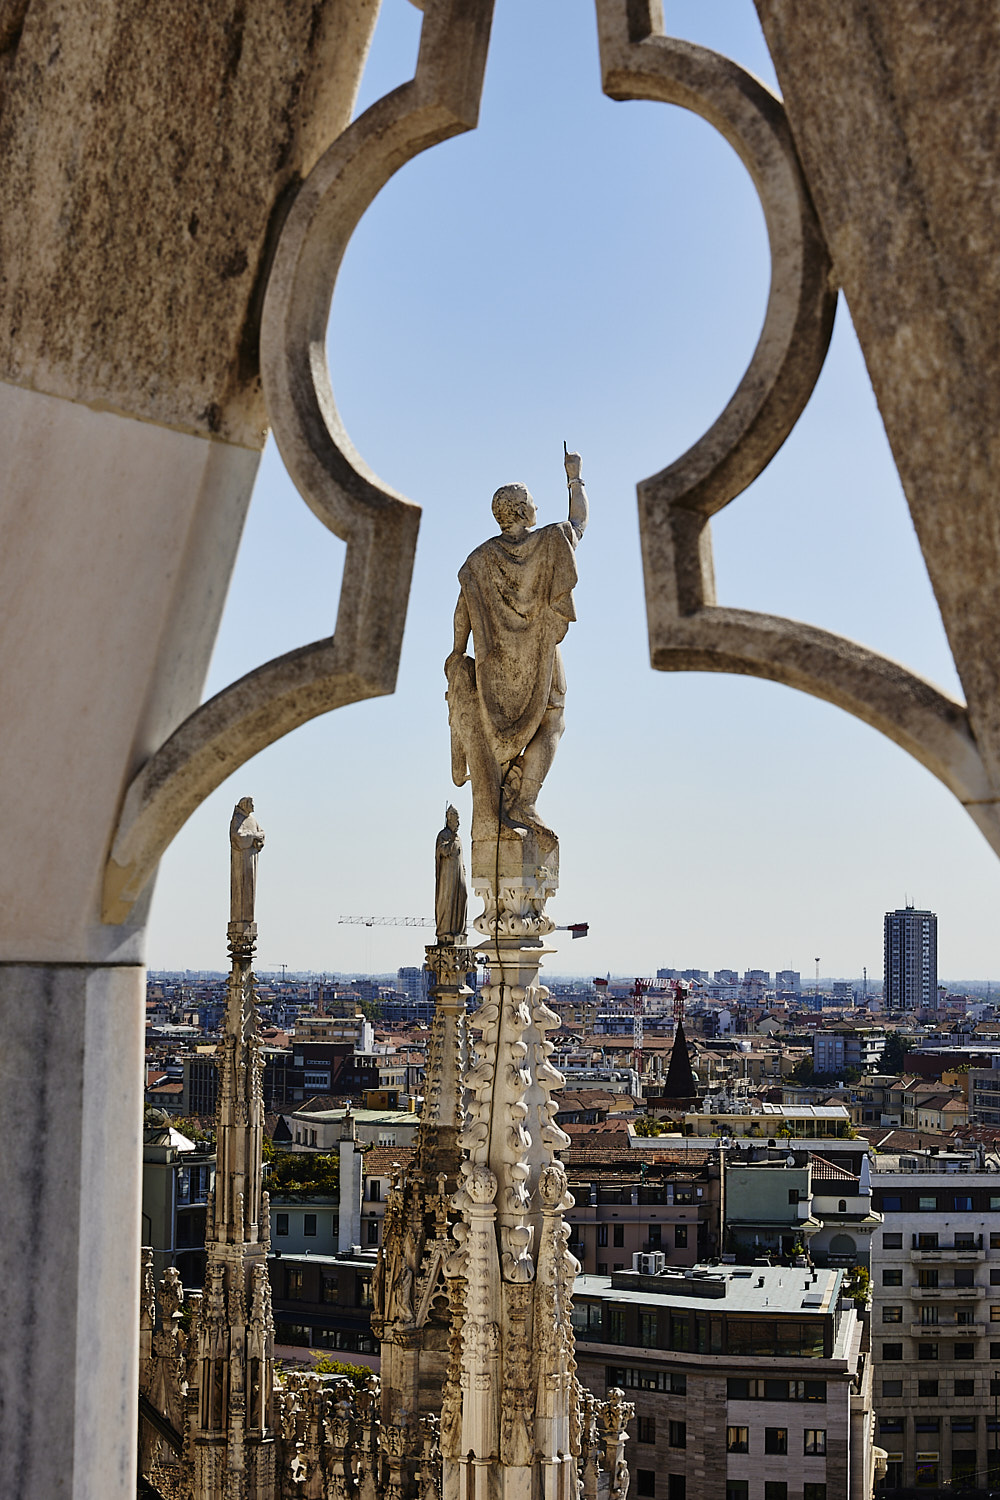 Roof top visit of the Duomo, Milan Italy